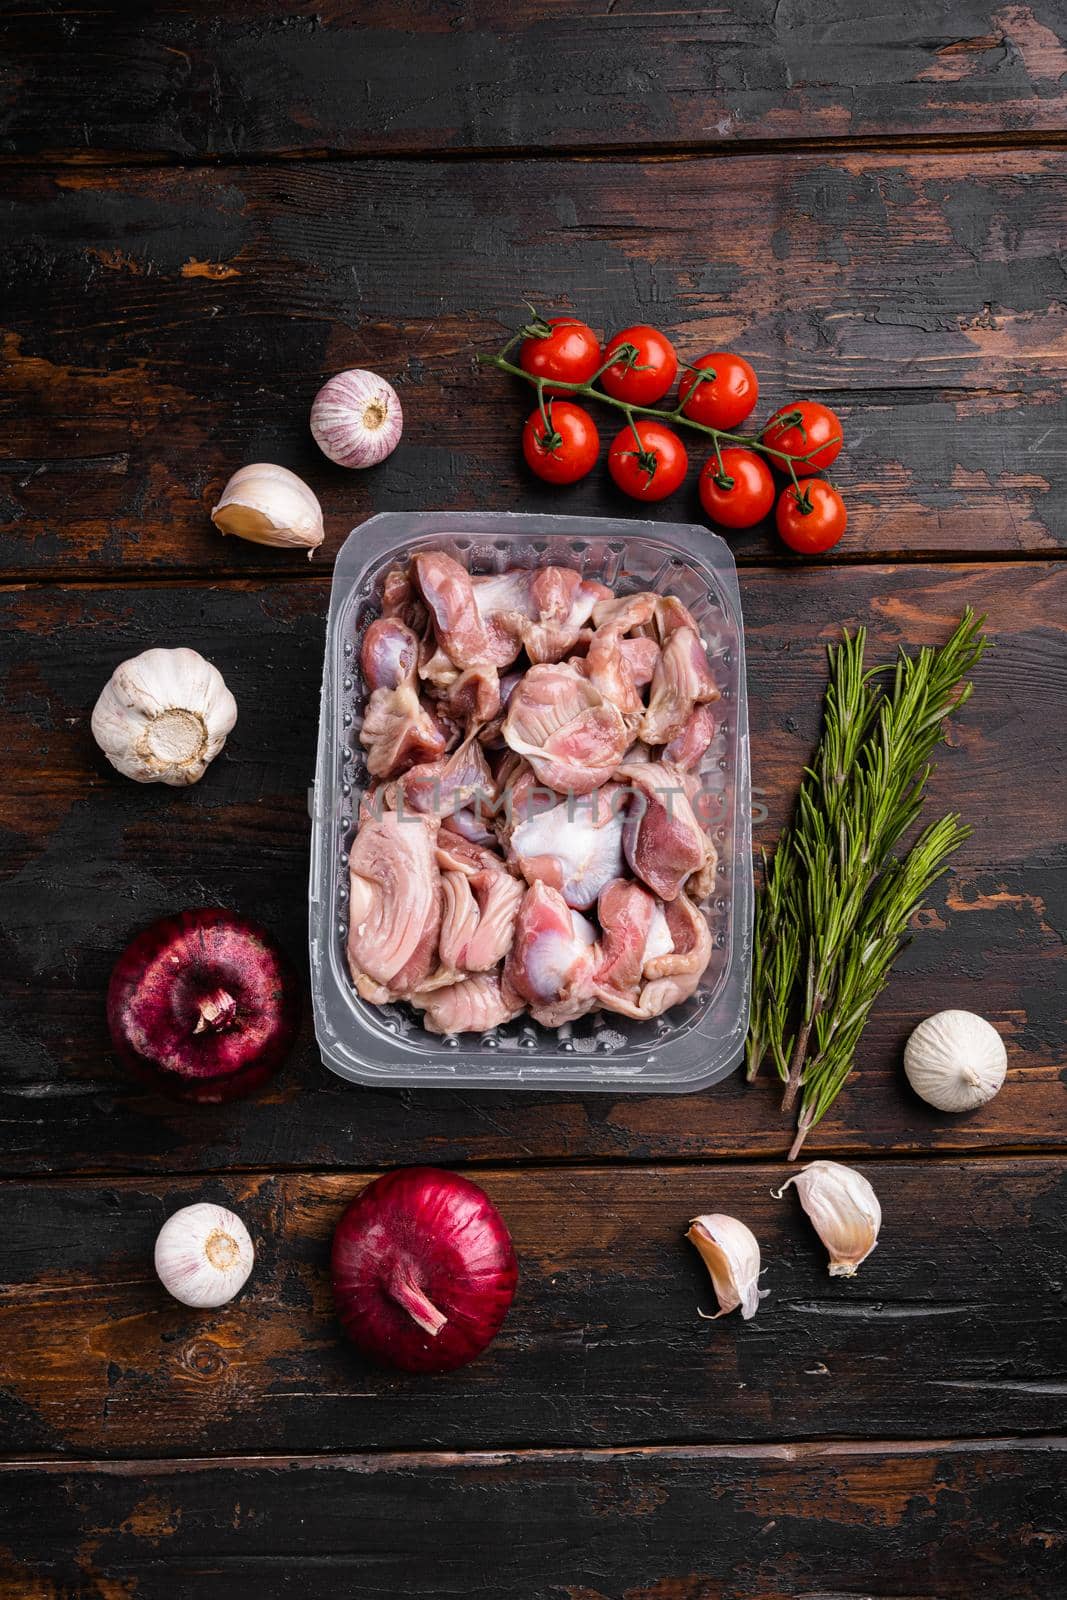 Bird chicken giblets gizzards stomachs Raw uncooked plastic pack, on old dark wooden table background, top view flat lay by Ilianesolenyi